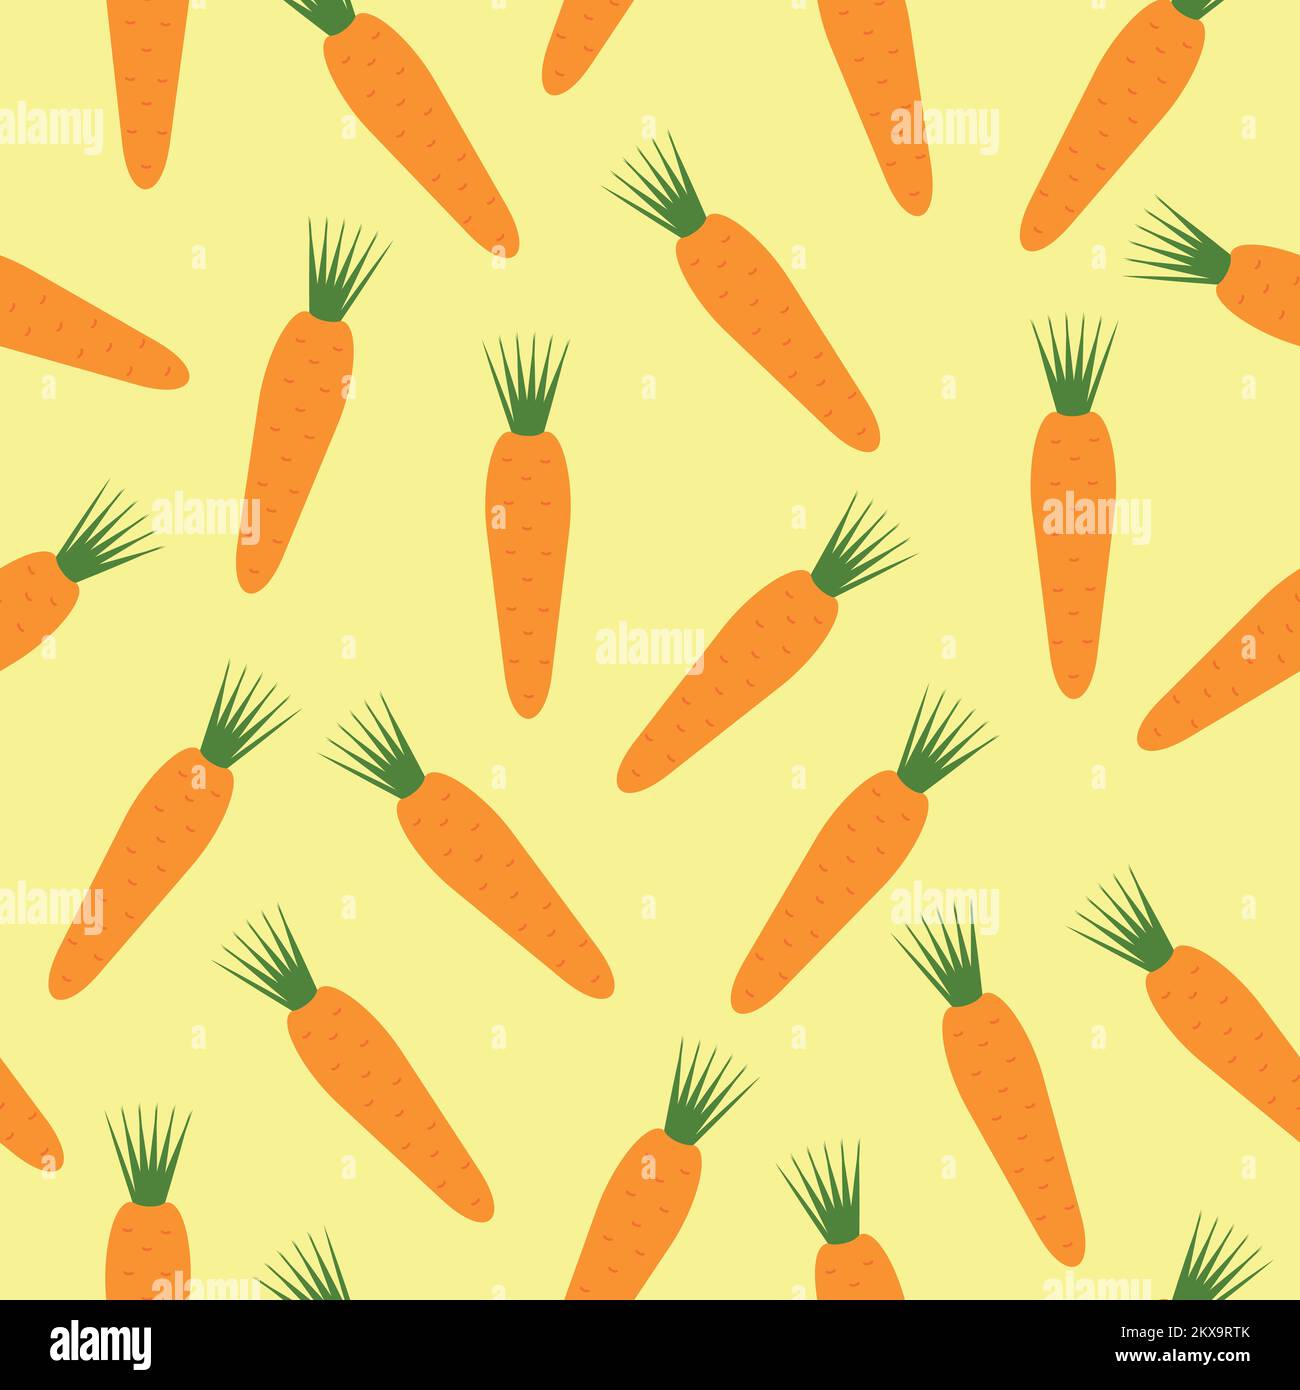 Seamless vector illustration in flat style. Carrots on a yellow background. Use cases are printing, wallpaper, wrapping paper, design, textiles, noteb Stock Vector